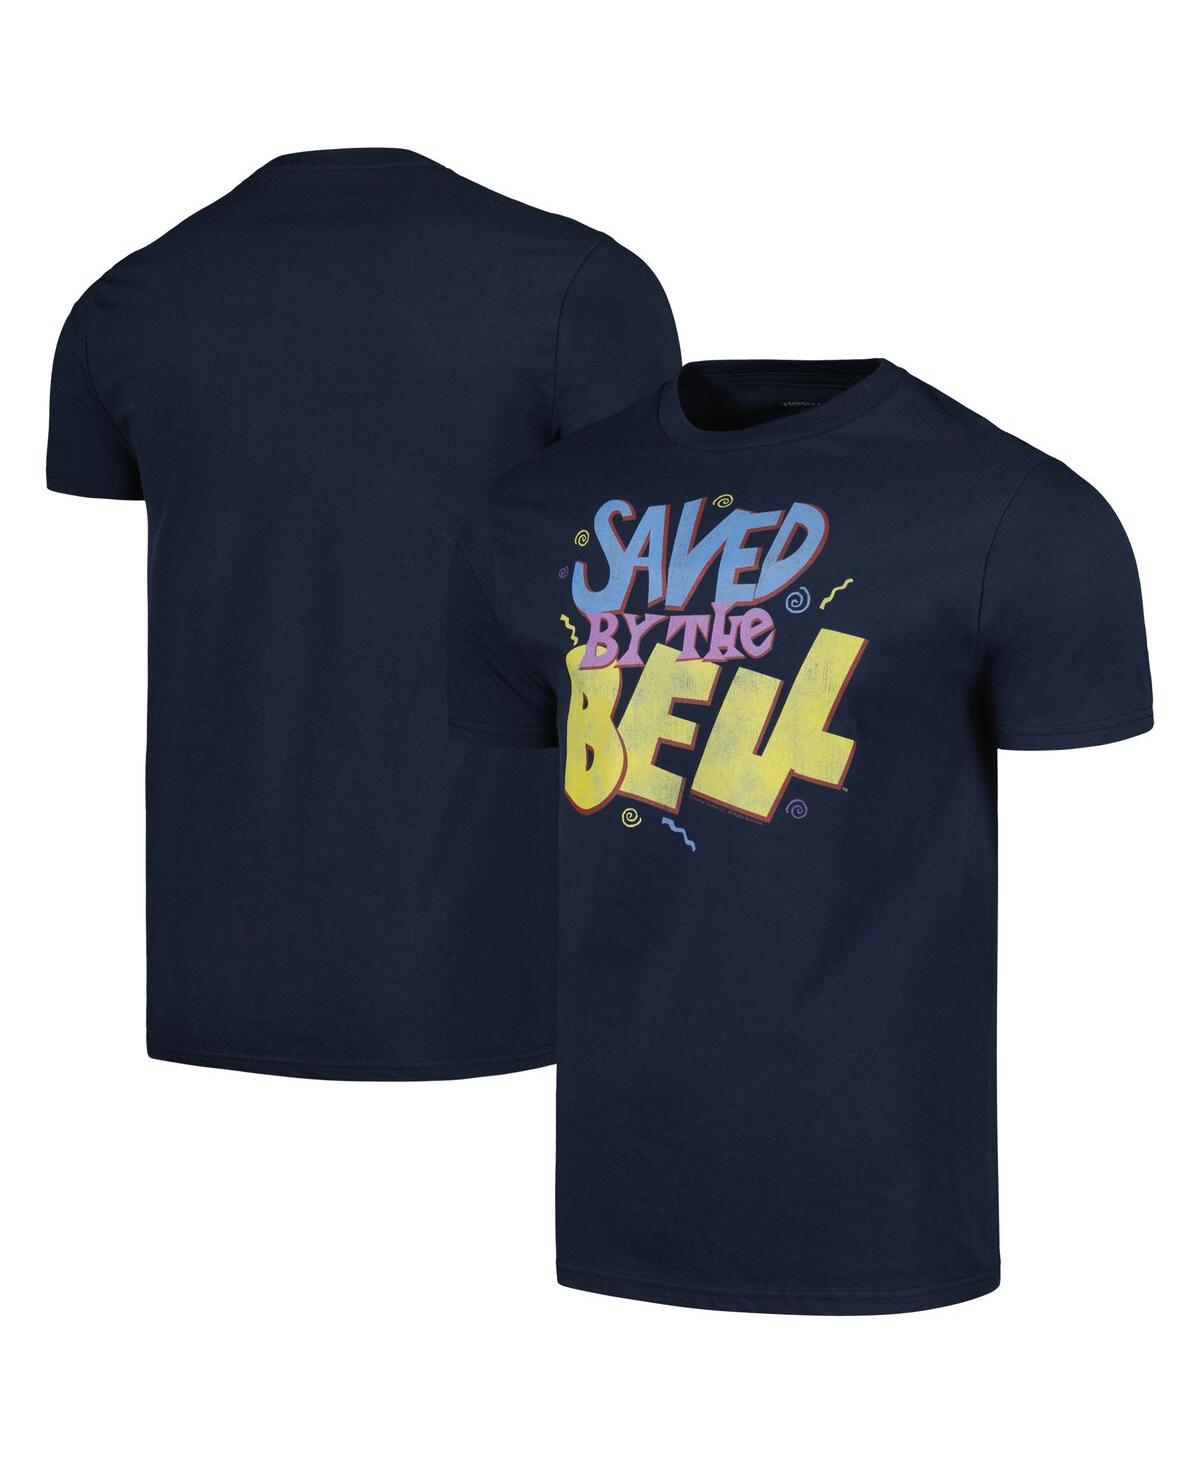 Shop American Classics Men's Navy Saved By The Bell Faded Squiggles T-shirt